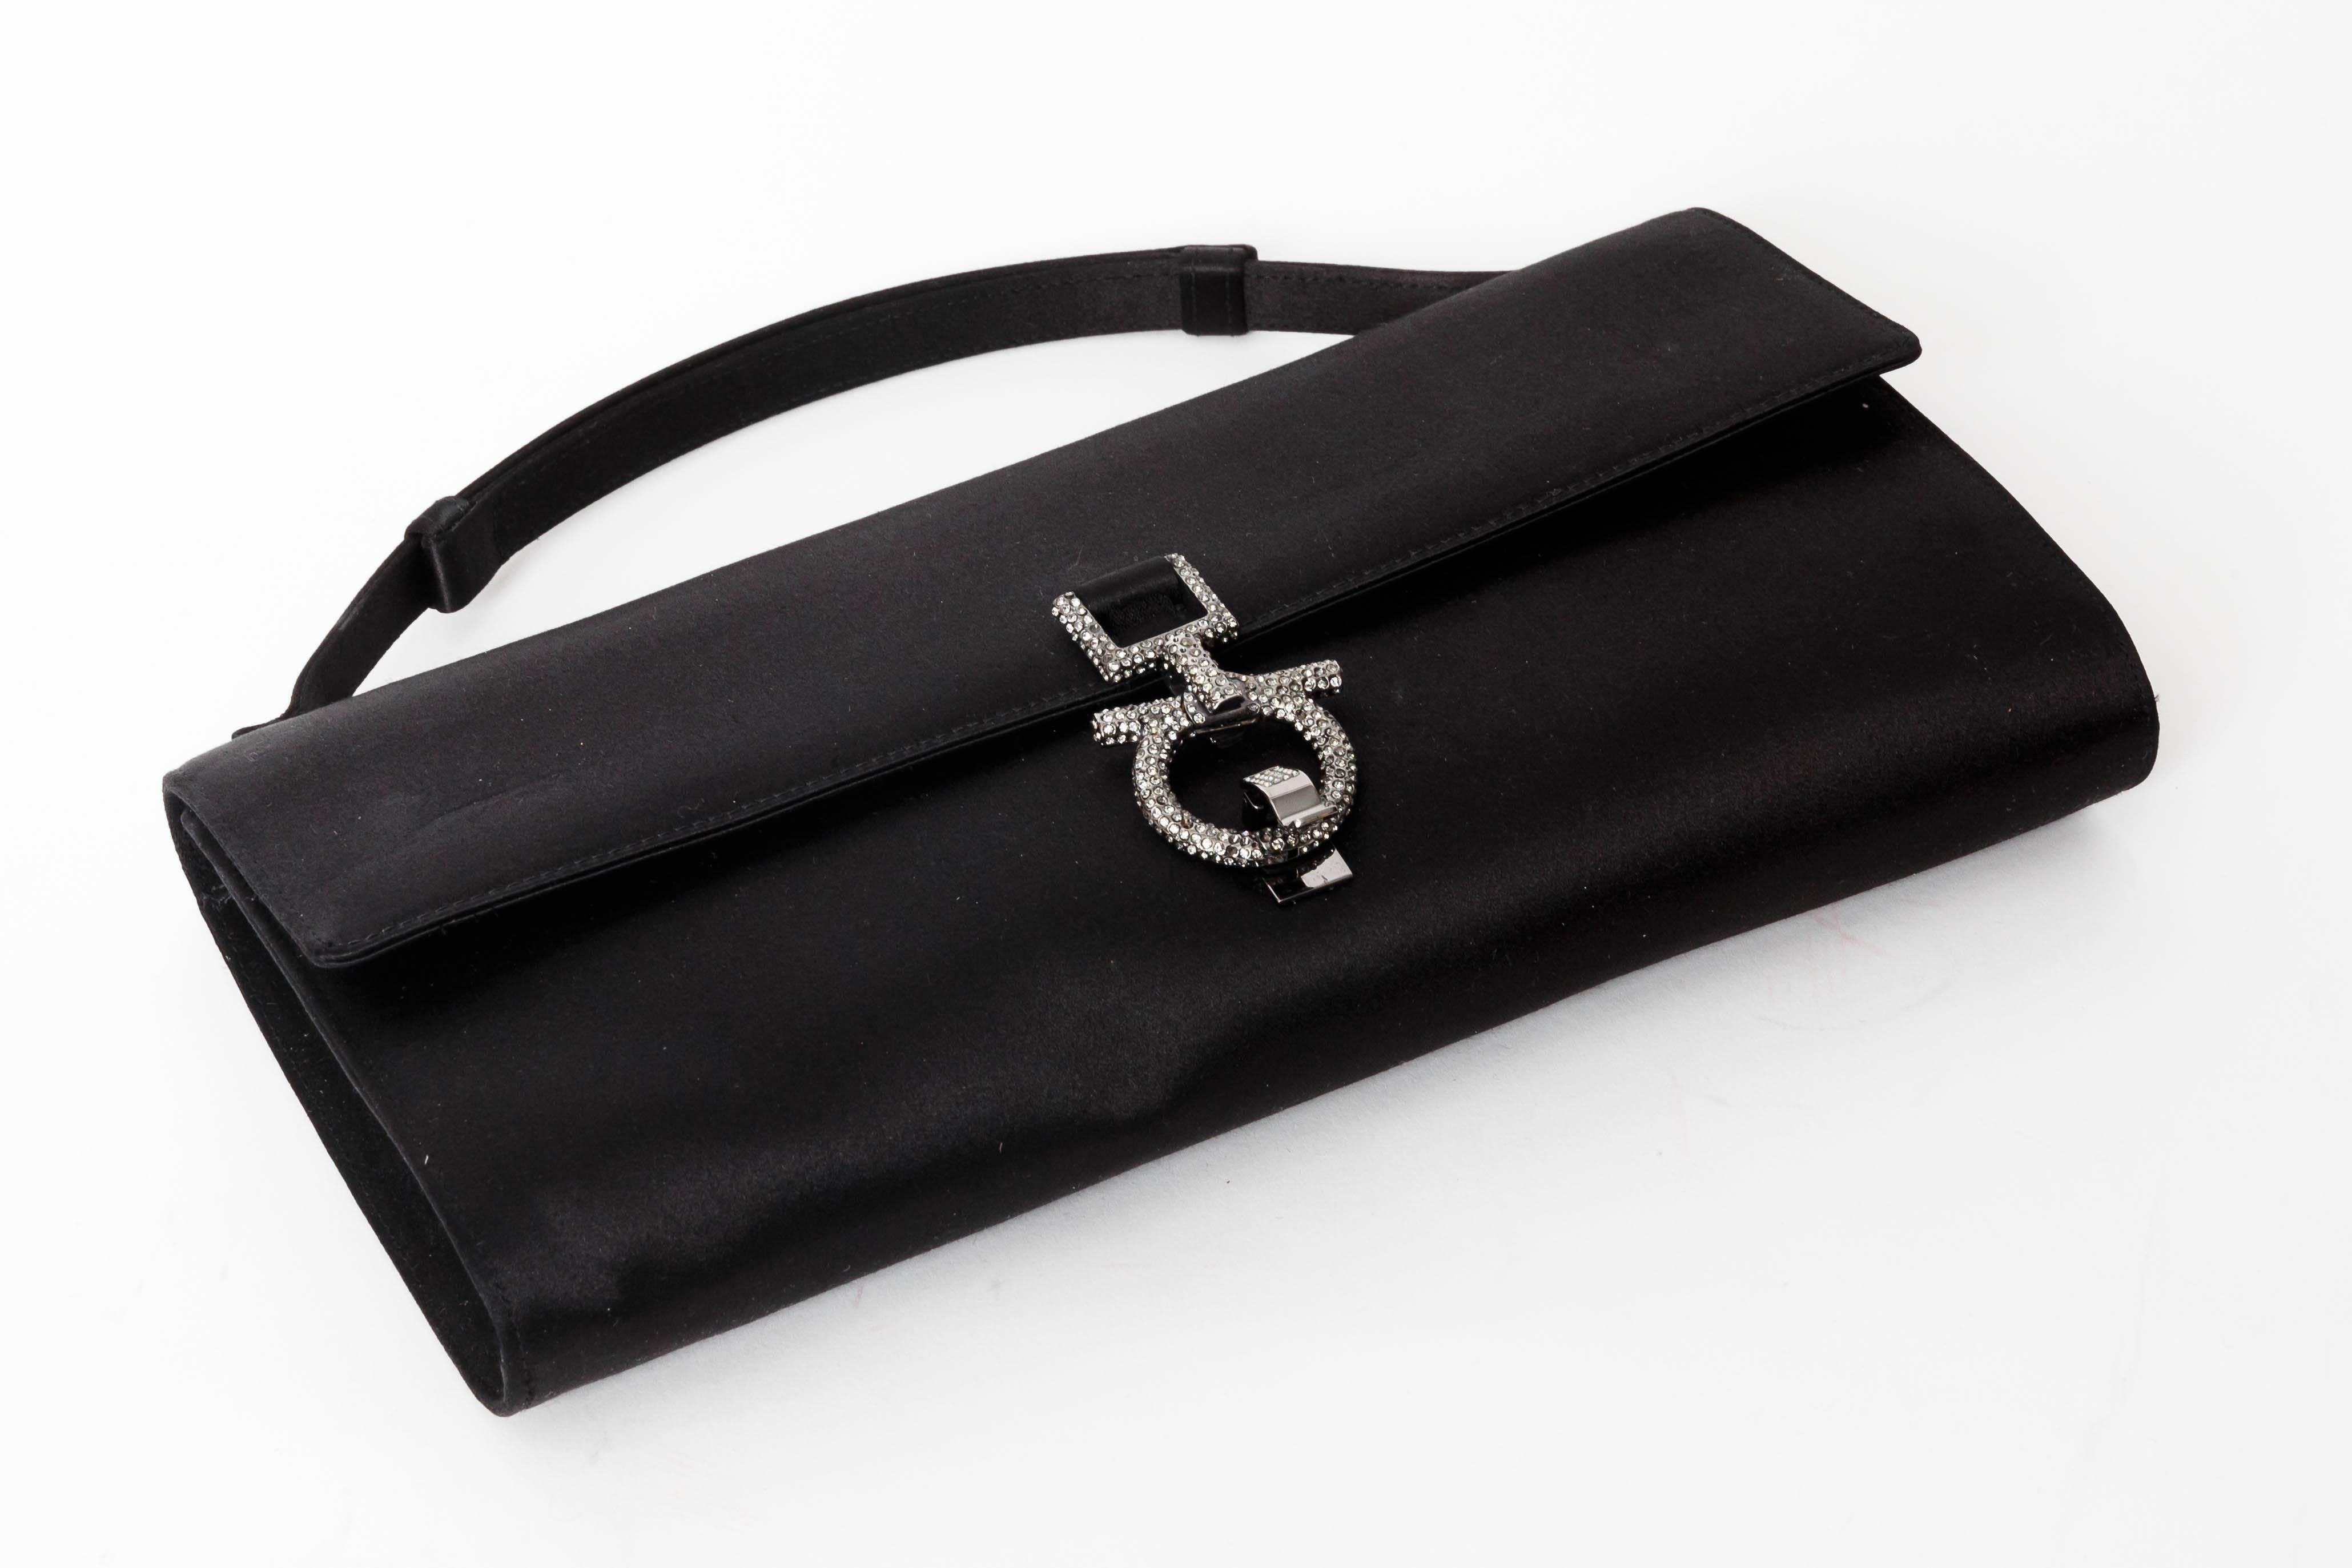 Elegant Ferragamo Clutch in Black Silk with Crystal Gancini Closure
There are a couple of indentations in the silk. We believe these could be steamed out but will leave that to the new owner.